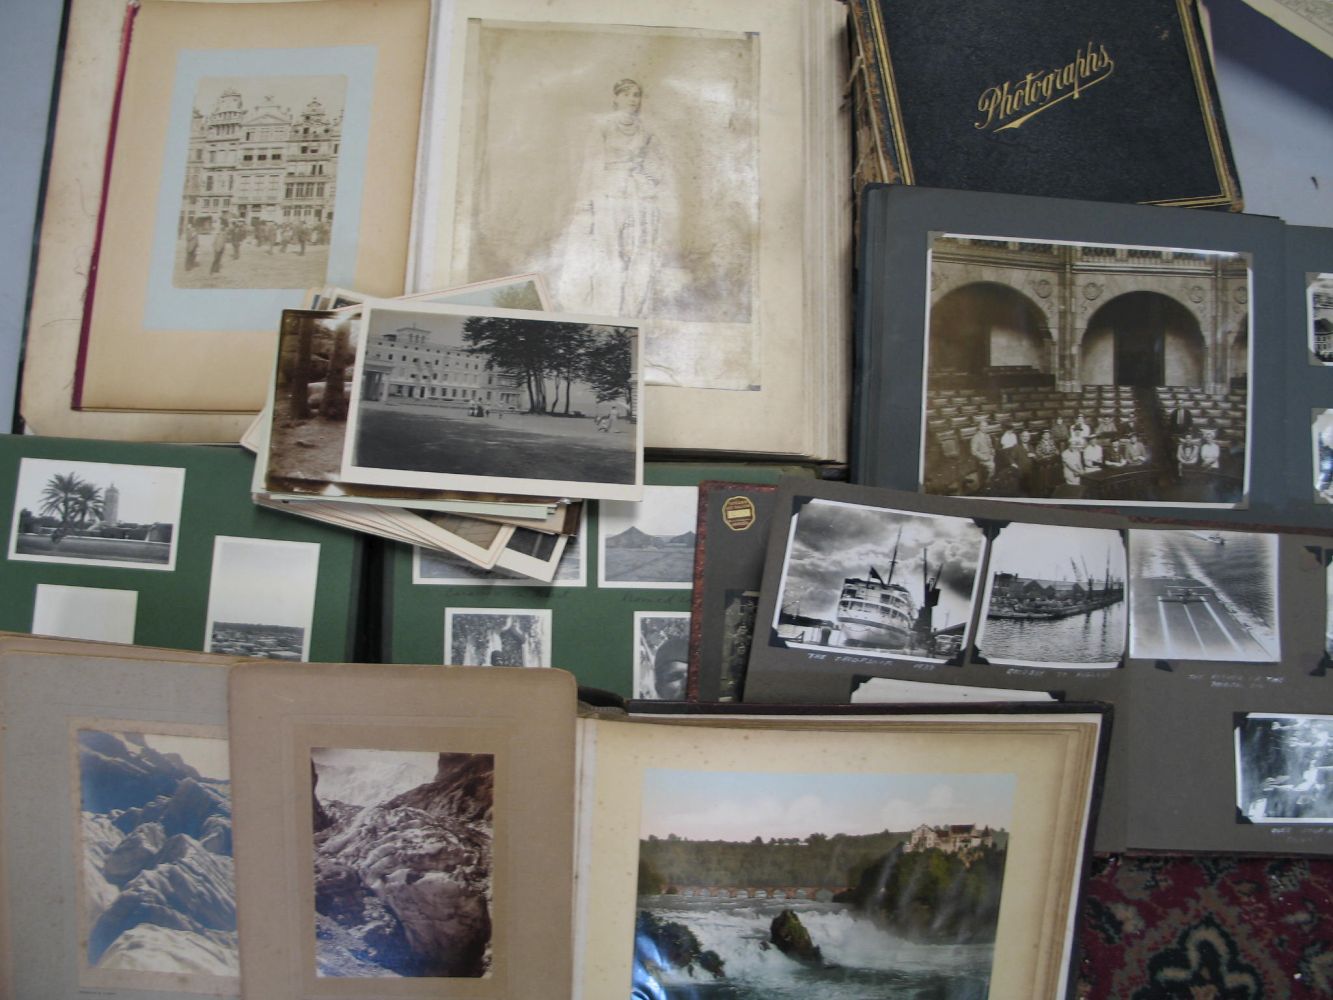 PHOTOGRAPHY. Group of 6 misc. photograph travel albums, including North Africa, Switzerland and